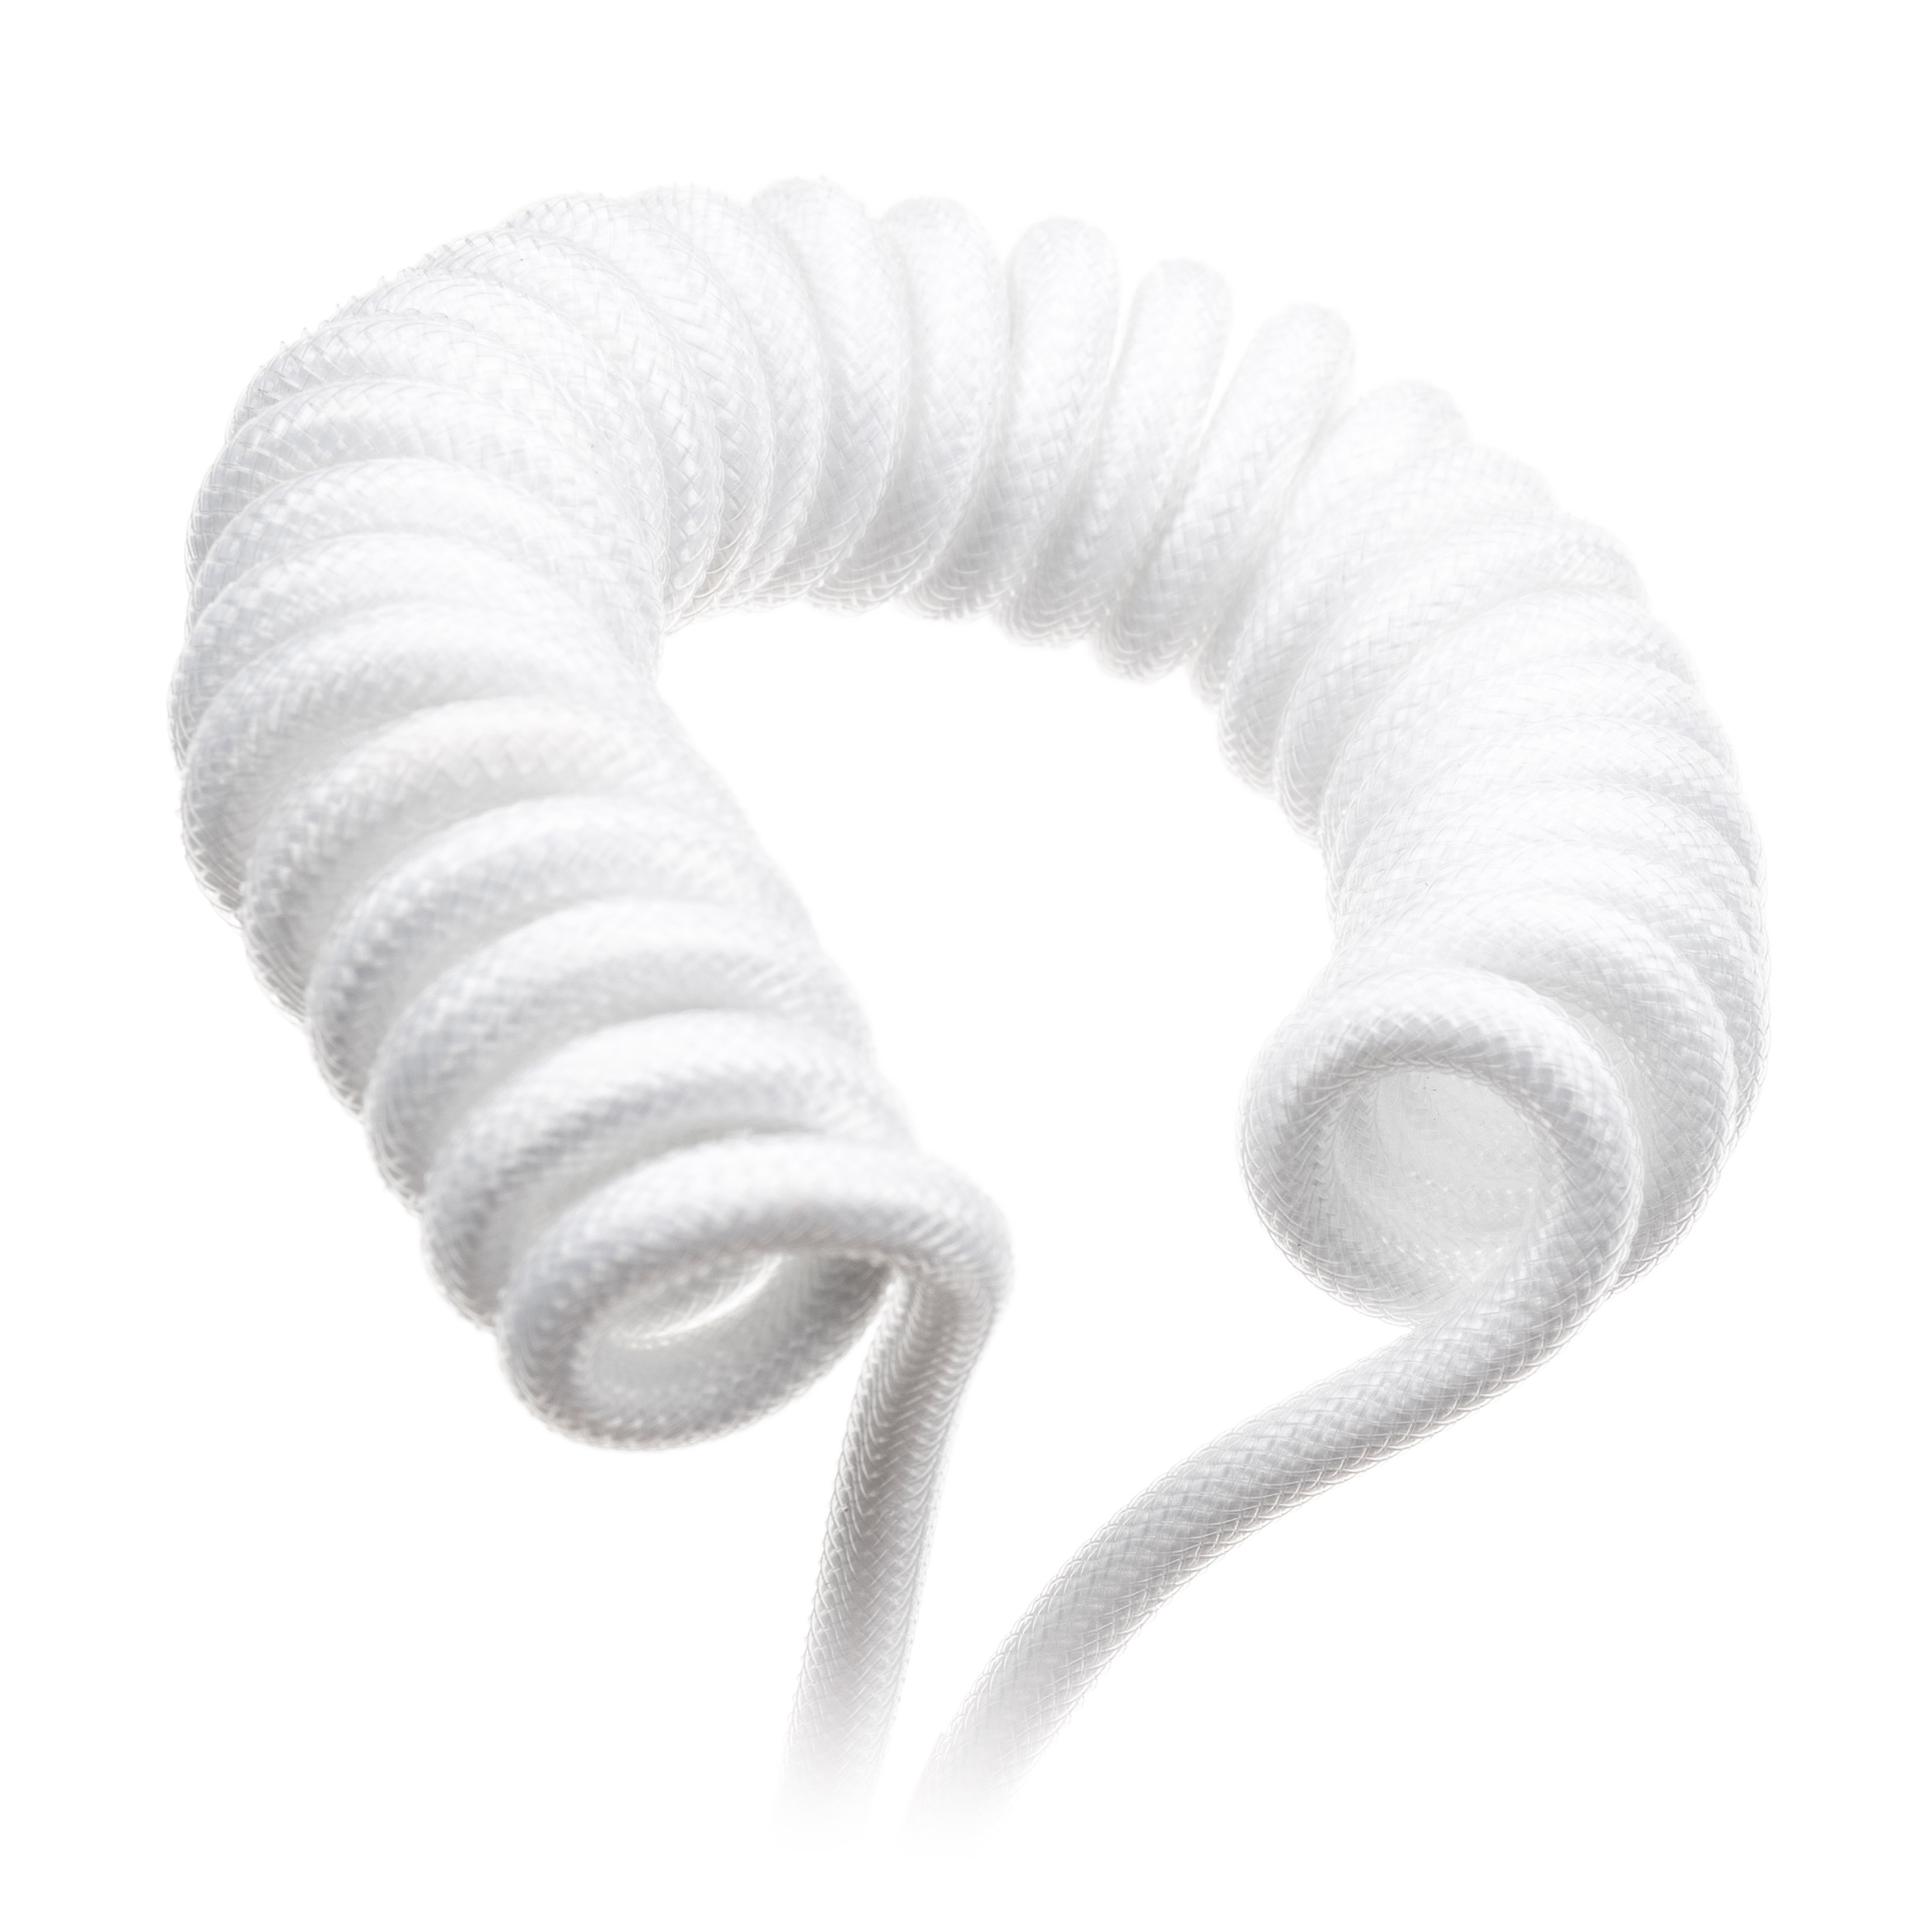 Ducky - Ducky Keyboard Coiled Cable V2 Pure White